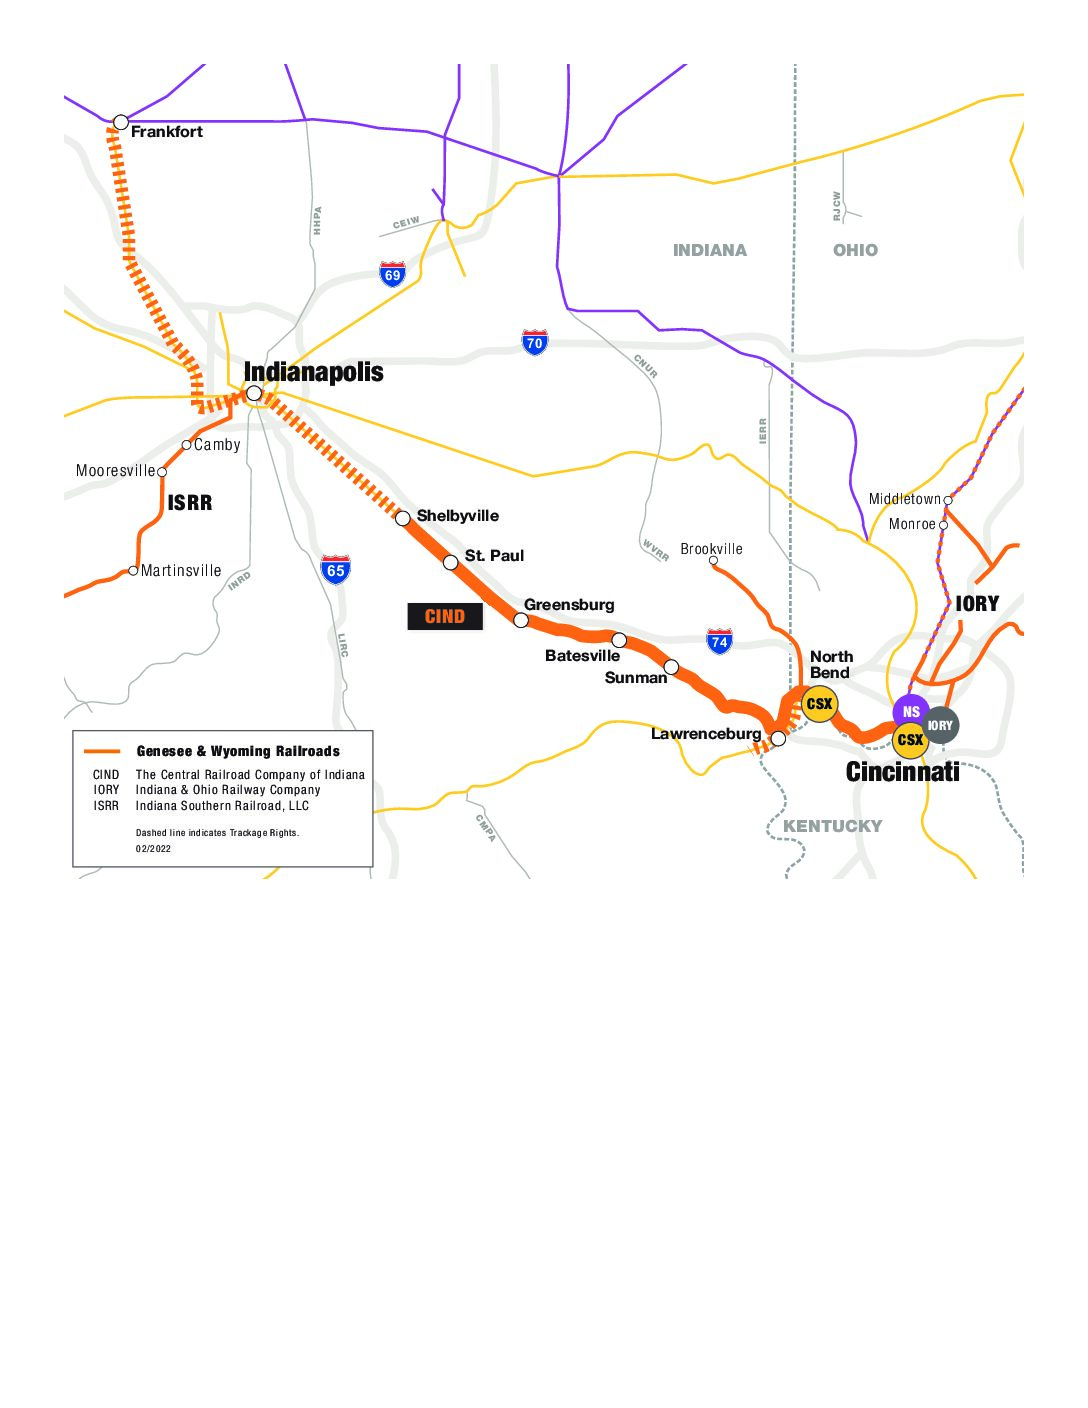 Indiana Railroad Map 2019 Central Railroad Of Indiana – A Genesee & Wyoming Company